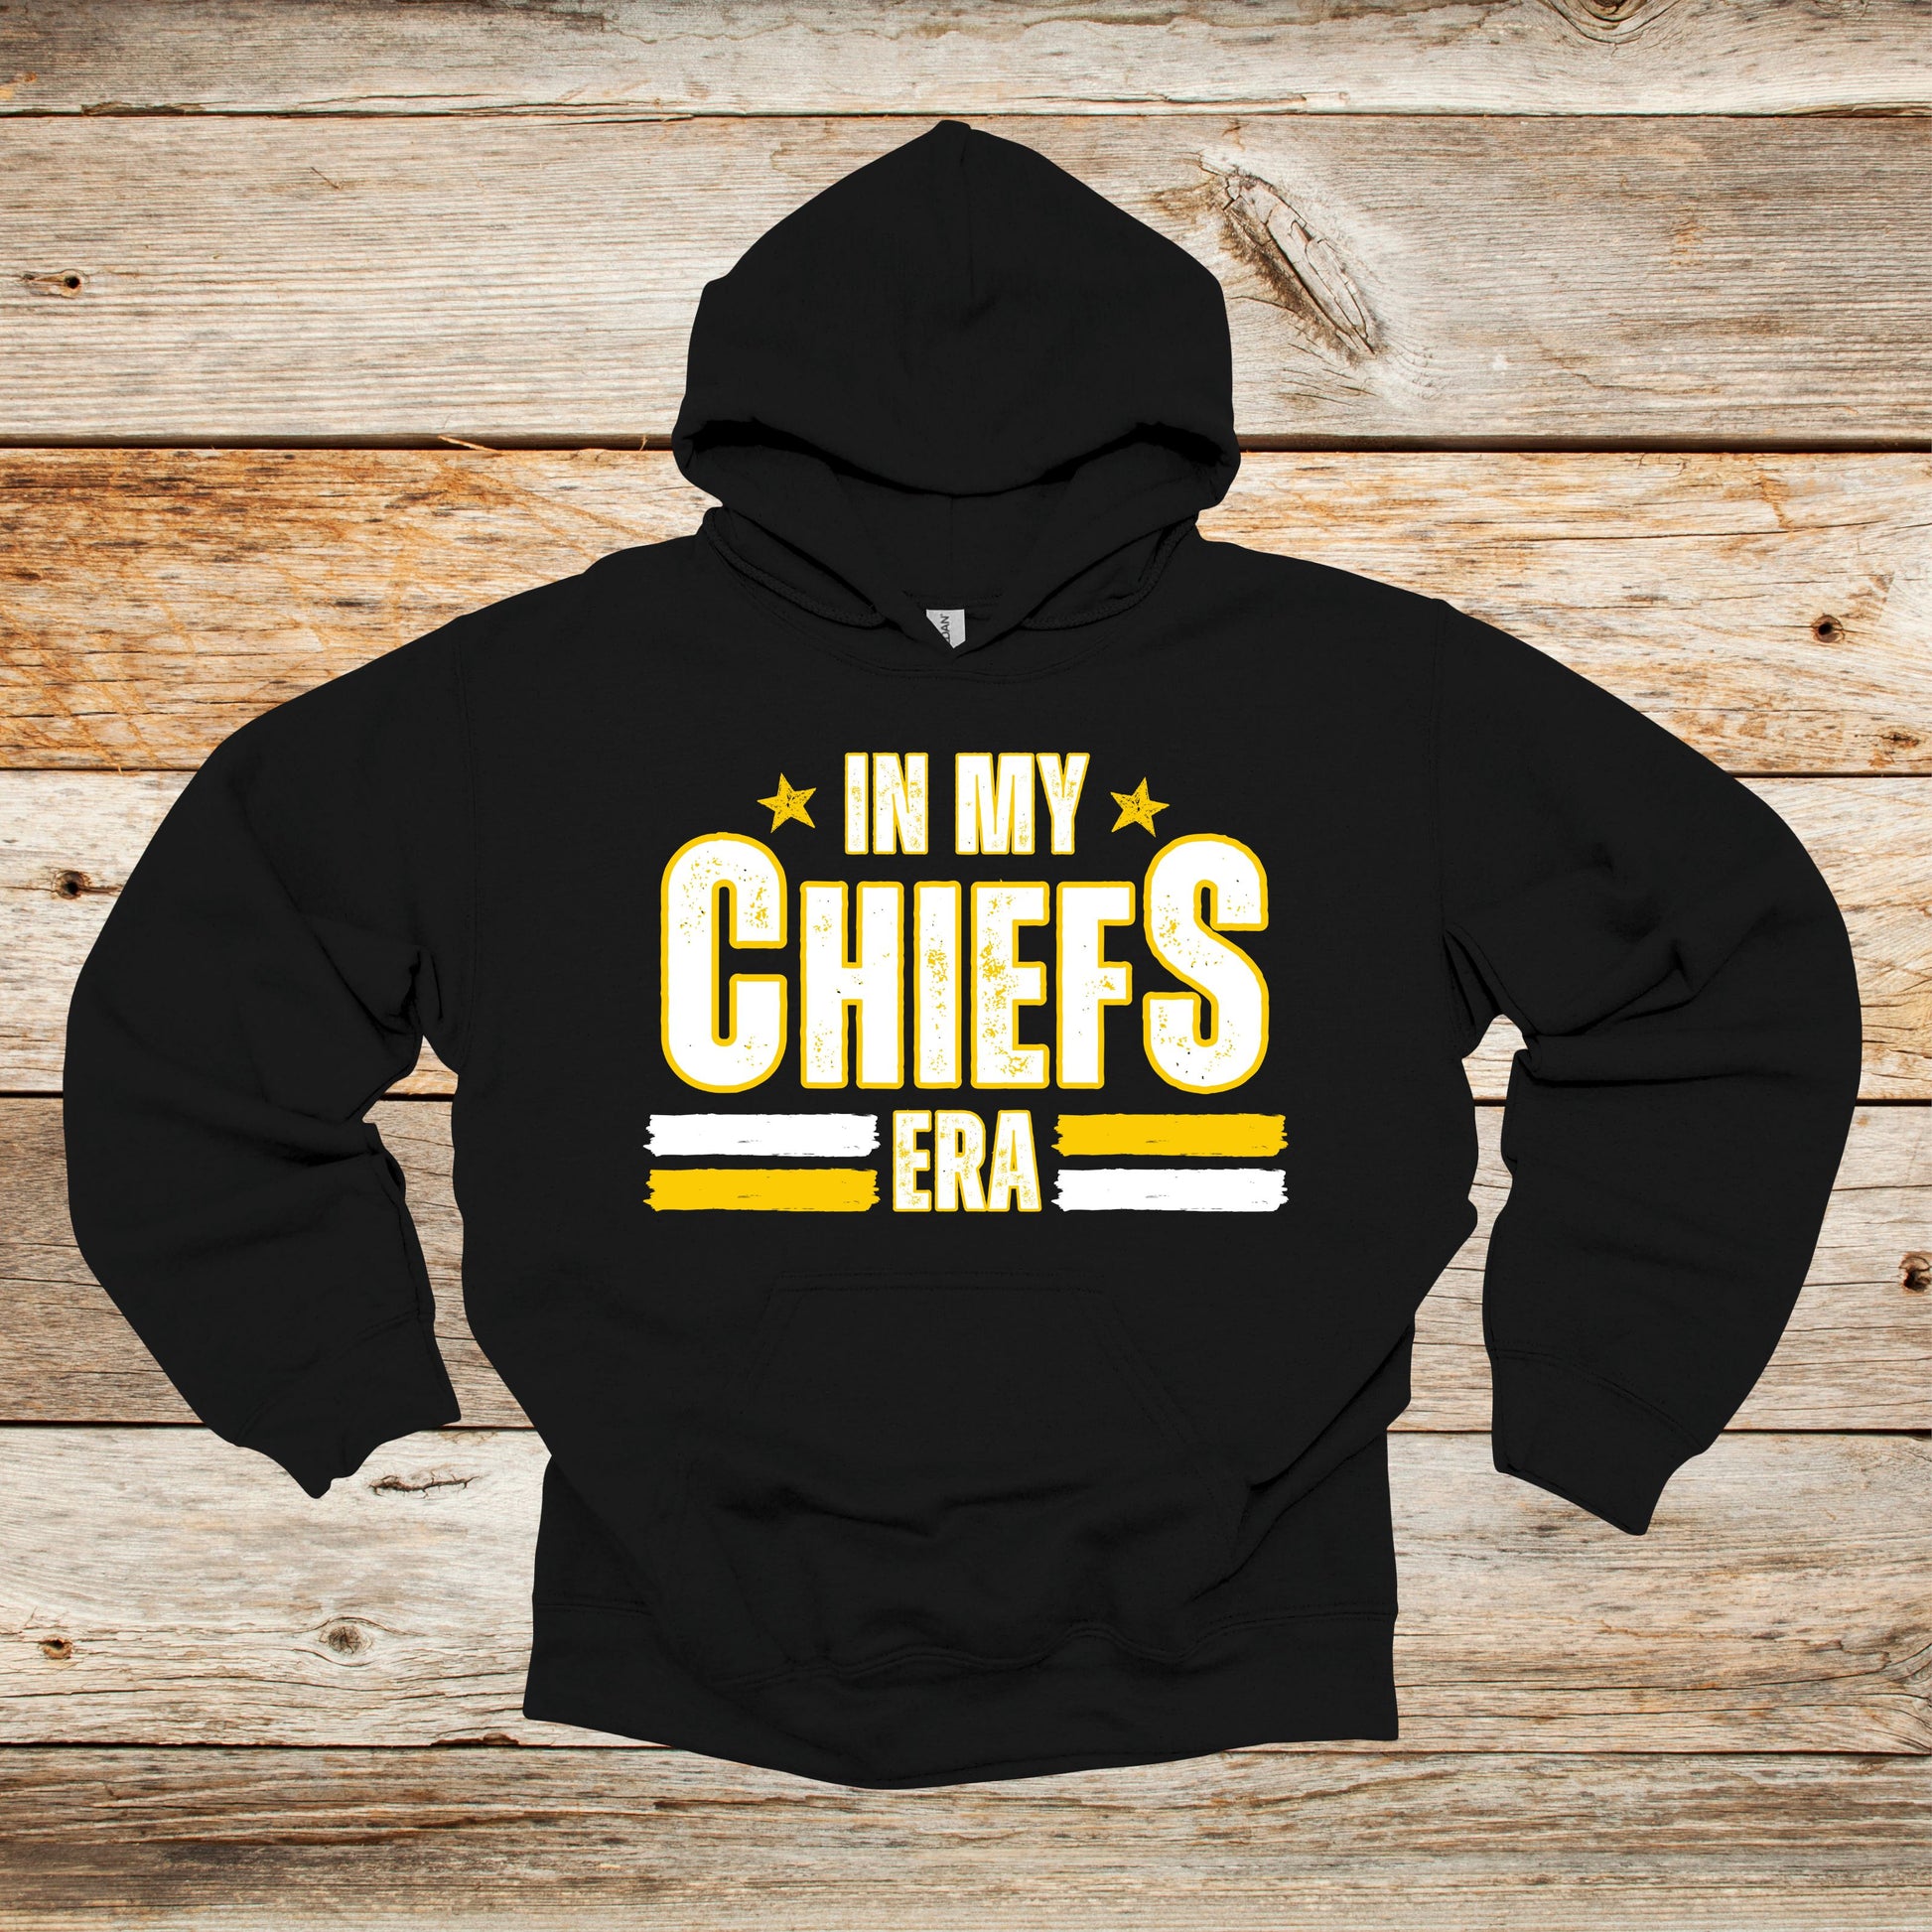 Football Crewneck and Hooded Sweatshirt - Chiefs Football - In My Chiefs Era - Adult and Children's Tee Shirts - Sports Hooded Sweatshirt Graphic Avenue Hooded Sweatshirt Black Adult Small